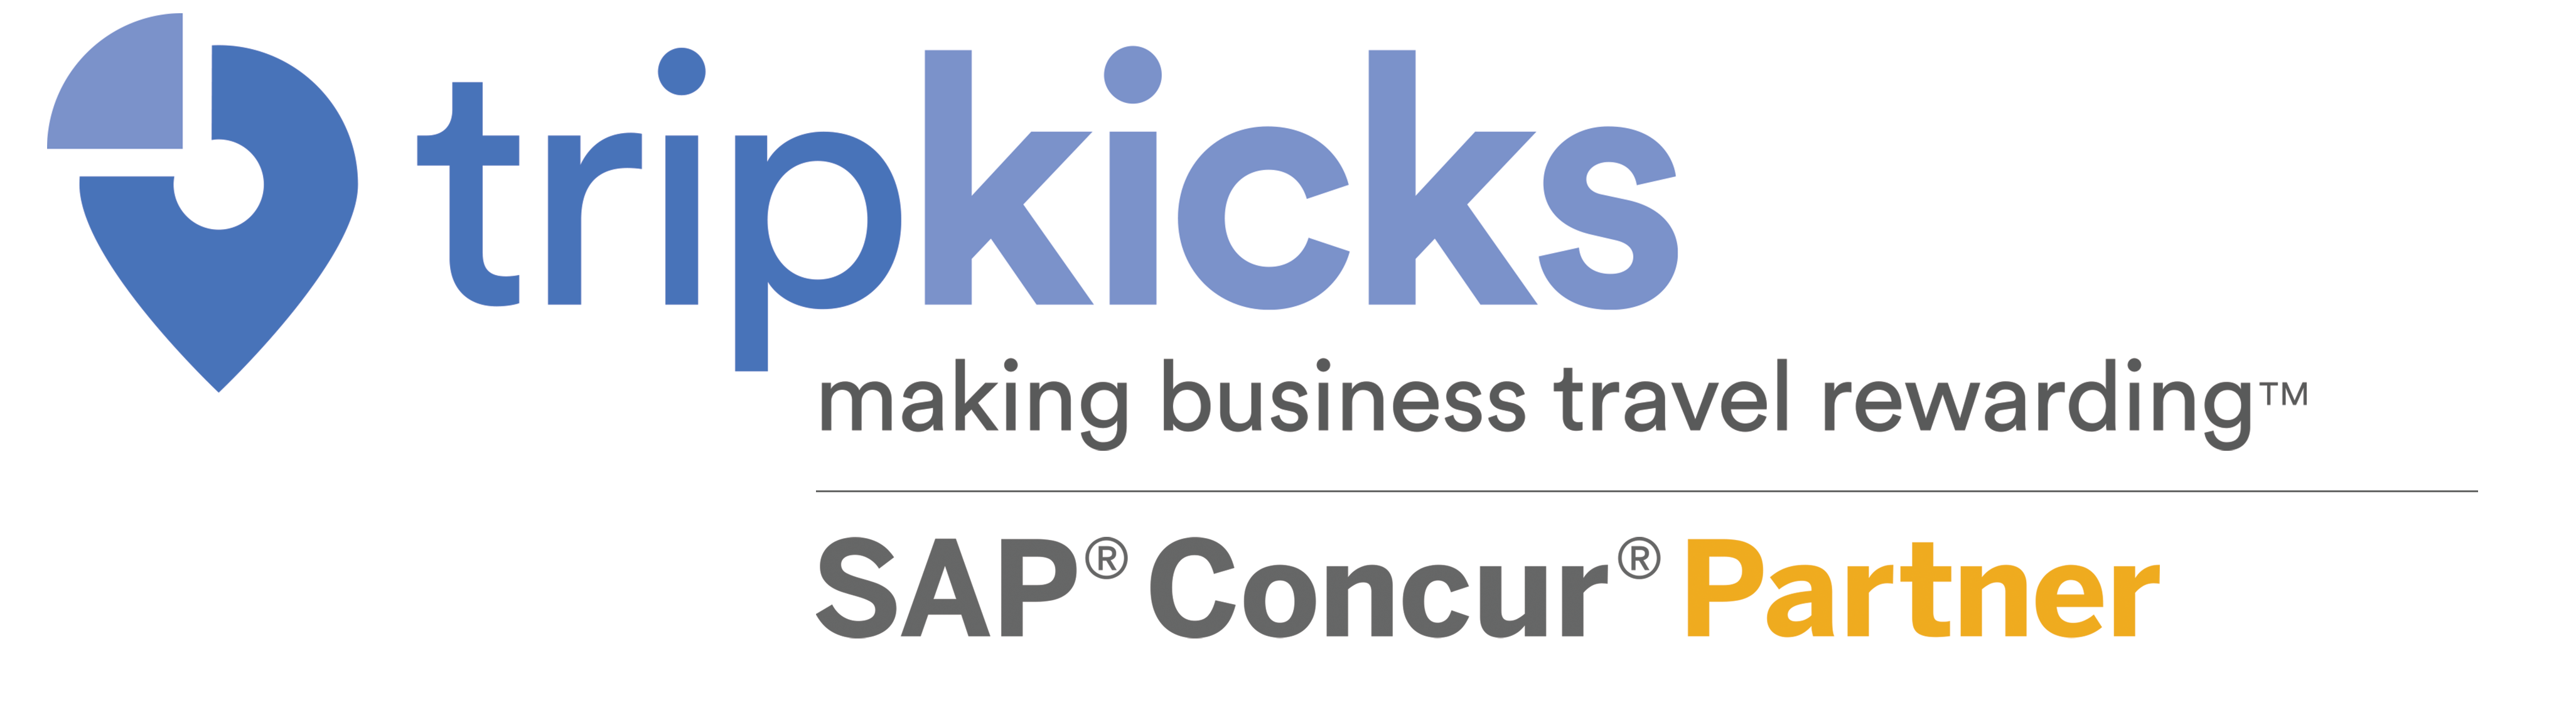 Tripkicks Integrates With Sap Concur Continuing Its Mission To